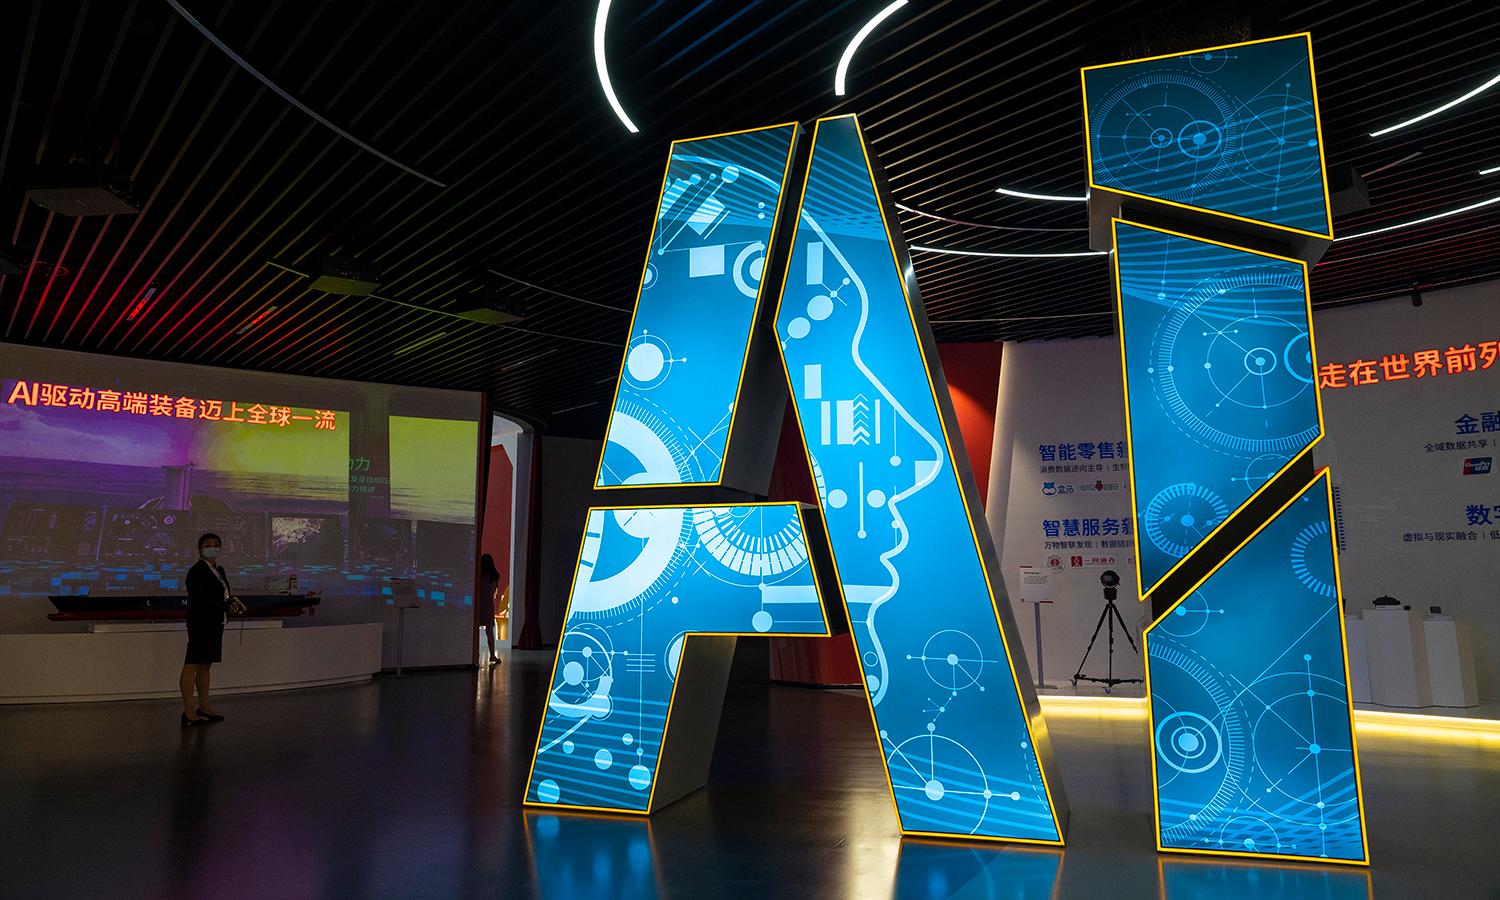 Cutting-edge applications of artificial intelligence are seen on display at the Artificial Intelligence Pavilion of Zhangjiang Future Park during a state organized media tour on June 18, 2021, in Shanghai, China. (Andrea Verdelli/Getty Images)